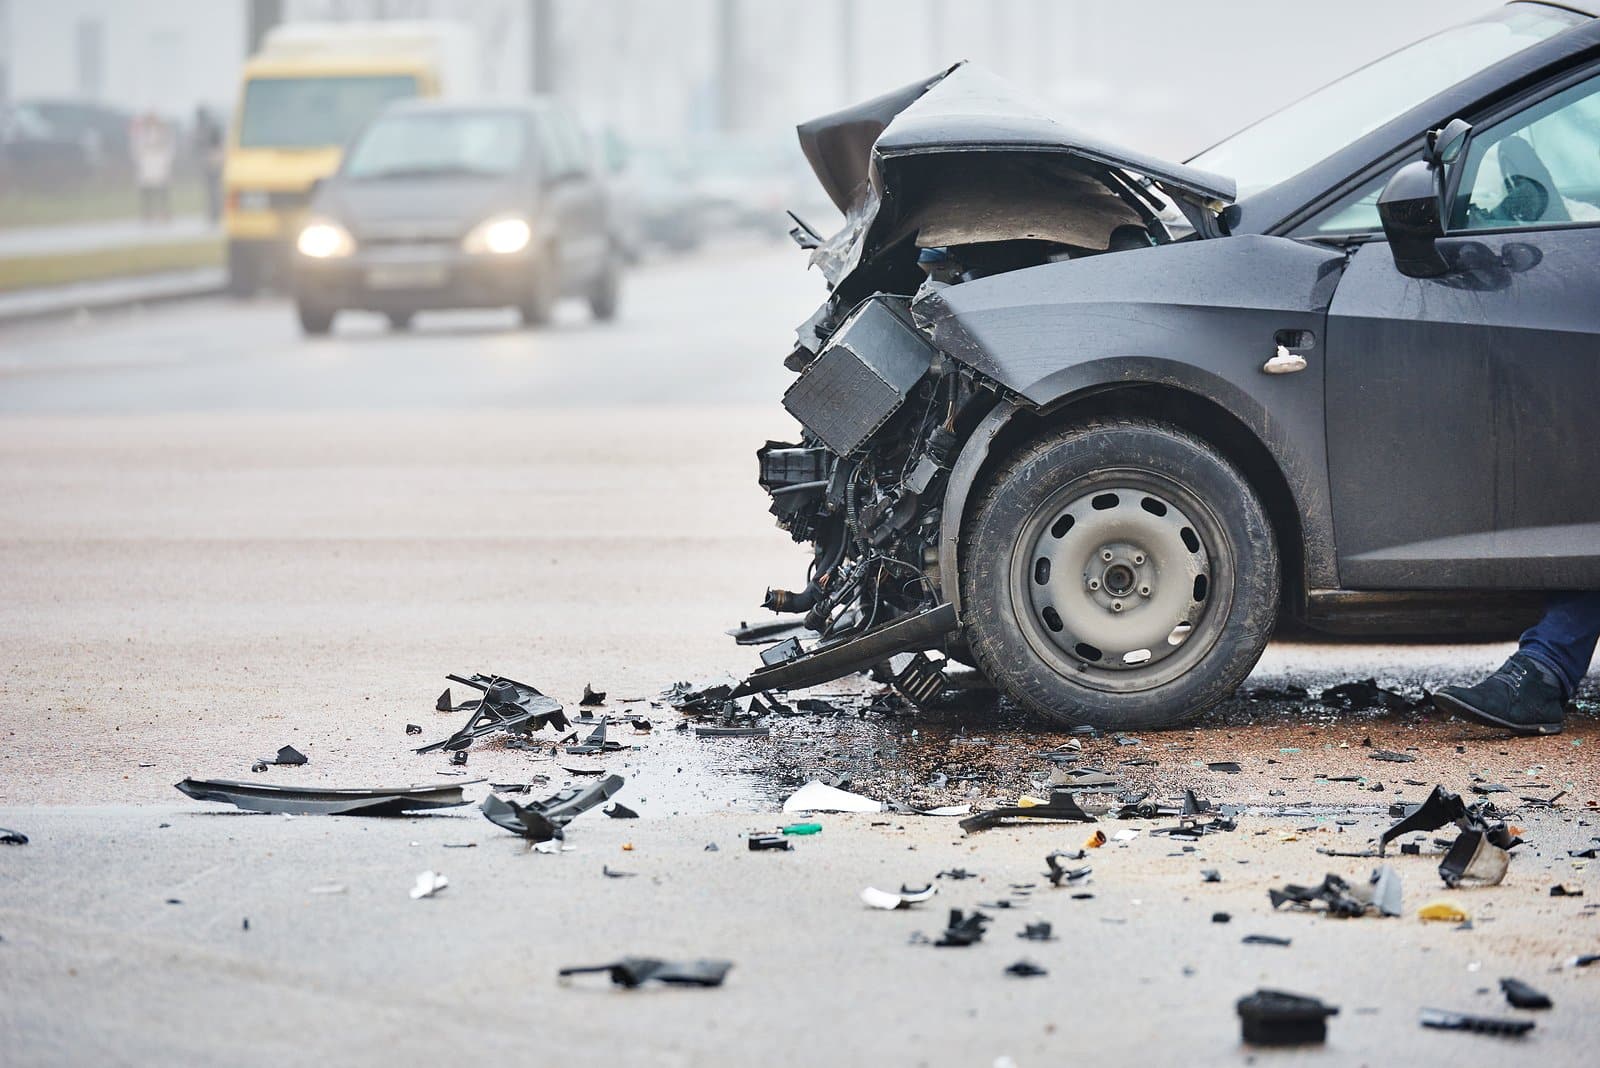 What Happens if You Get in an Accident Without Insurance?